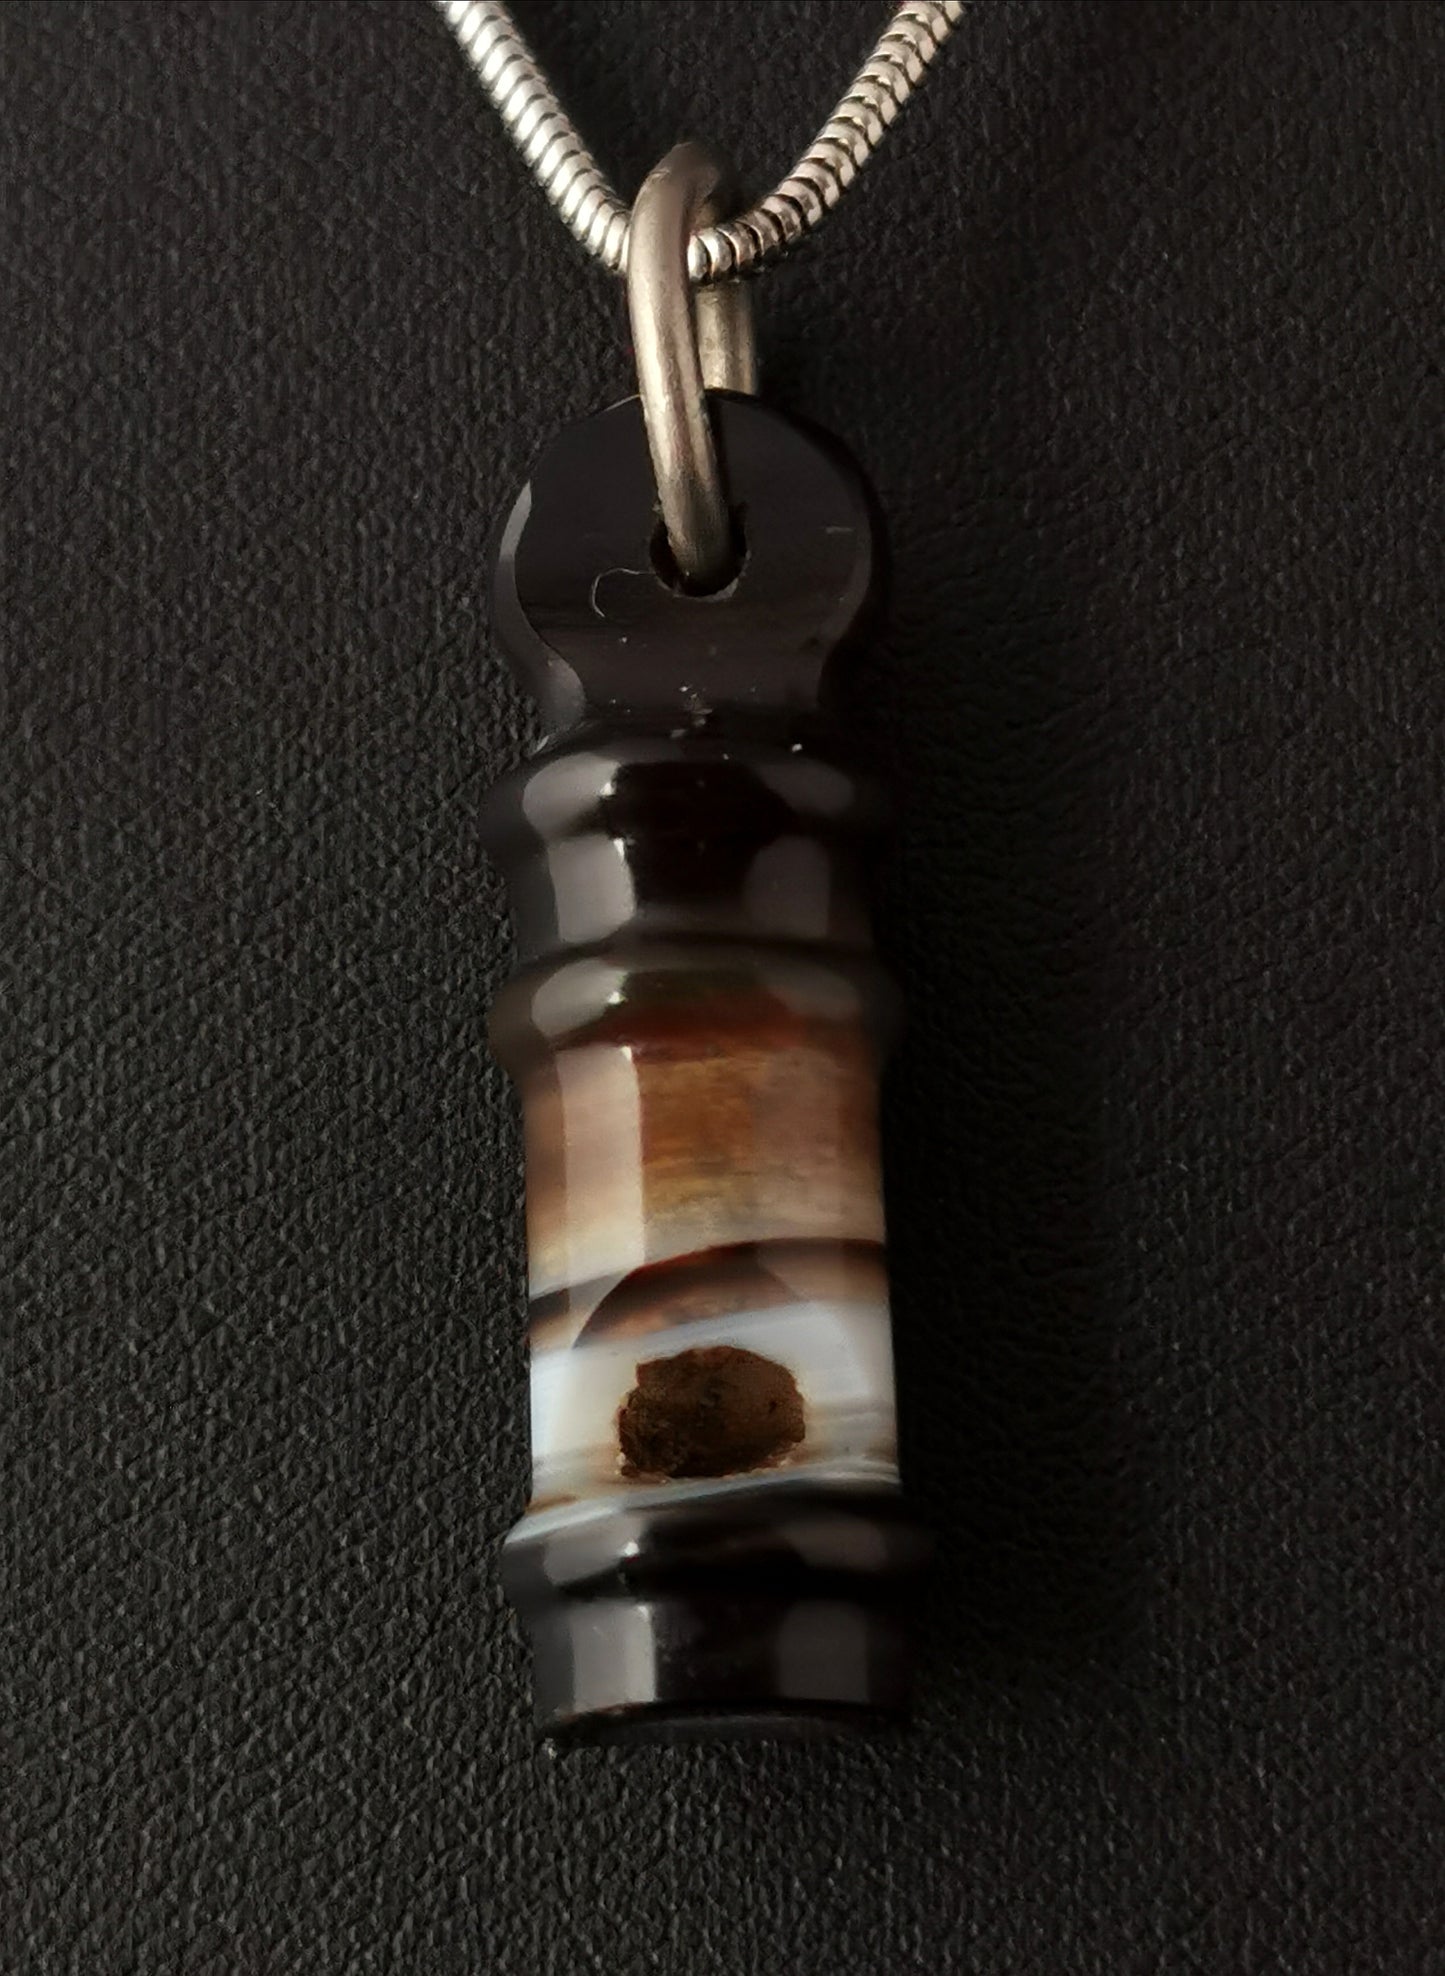 Victorian banded agate whistle pendant, silver necklace